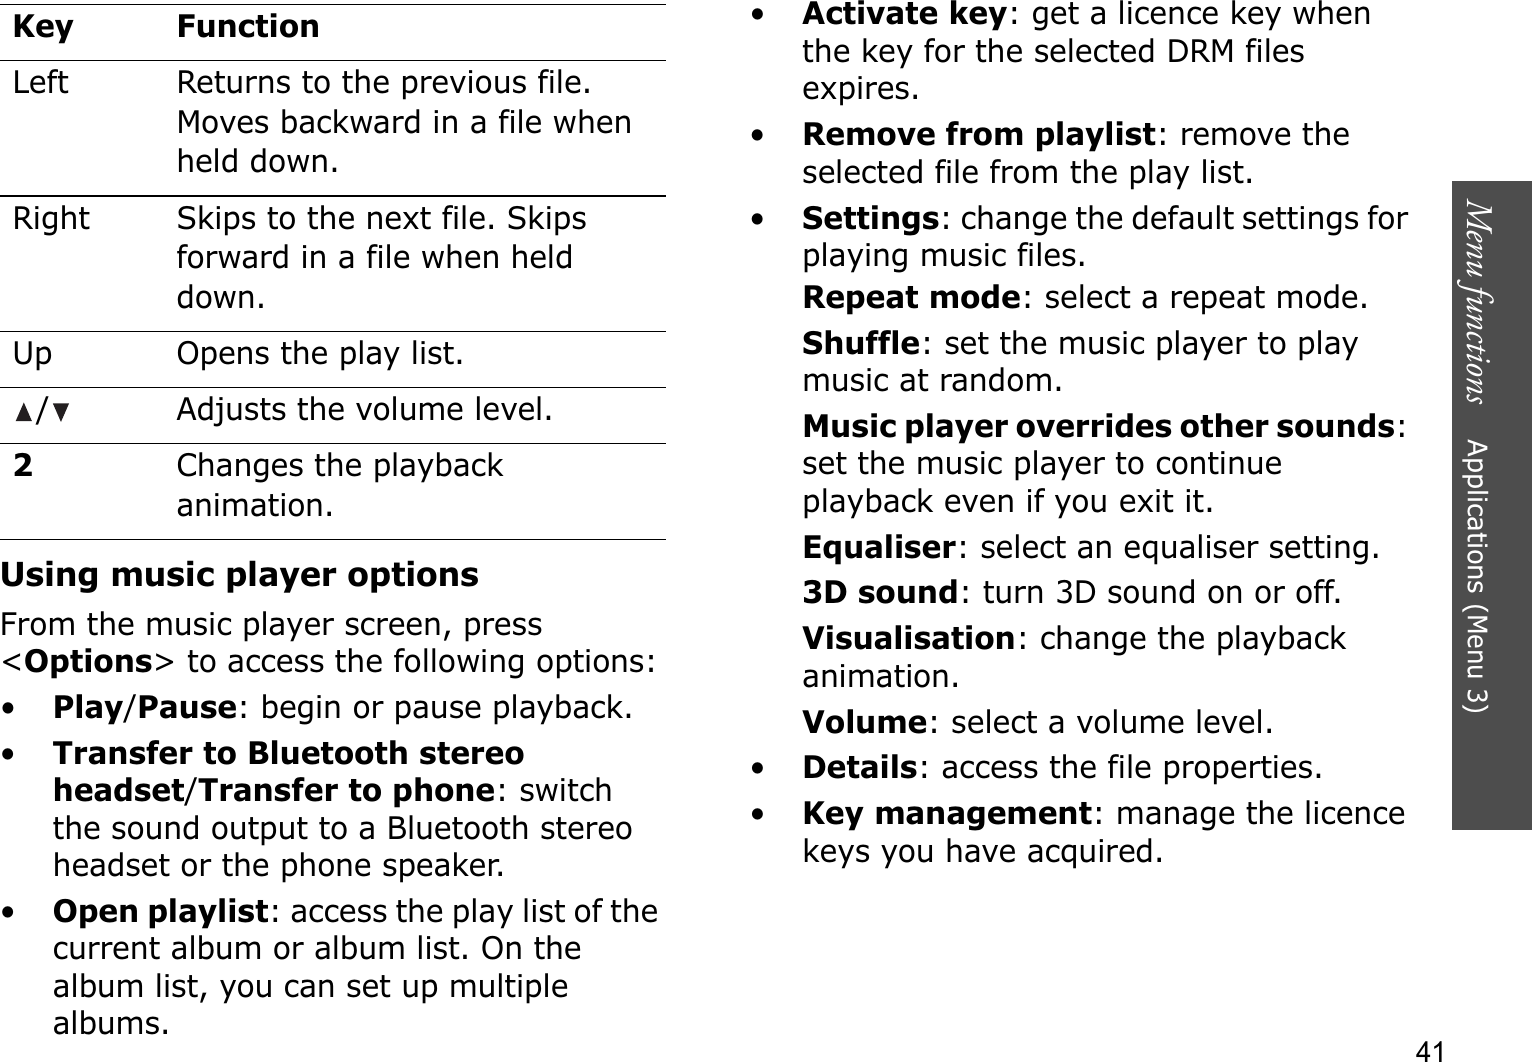 Menu functions    Applications (Menu 3)41Using music player optionsFrom the music player screen, press &lt;Options&gt; to access the following options:•Play/Pause: begin or pause playback.•Transfer to Bluetooth stereo headset/Transfer to phone: switch the sound output to a Bluetooth stereo headset or the phone speaker.•Open playlist: access the play list of the current album or album list. On the album list, you can set up multiple albums.•Activate key: get a licence key when the key for the selected DRM files expires.•Remove from playlist: remove the selected file from the play list.•Settings: change the default settings for playing music files. Repeat mode: select a repeat mode.Shuffle: set the music player to play music at random.Music player overrides other sounds:set the music player to continue playback even if you exit it.Equaliser: select an equaliser setting.3D sound: turn 3D sound on or off.Visualisation: change the playback animation.Volume: select a volume level.•Details: access the file properties.•Key management: manage the licence keys you have acquired.Left Returns to the previous file. Moves backward in a file when held down.Right Skips to the next file. Skips forward in a file when held down.Up Opens the play list./ Adjusts the volume level.2Changes the playback animation.Key Function